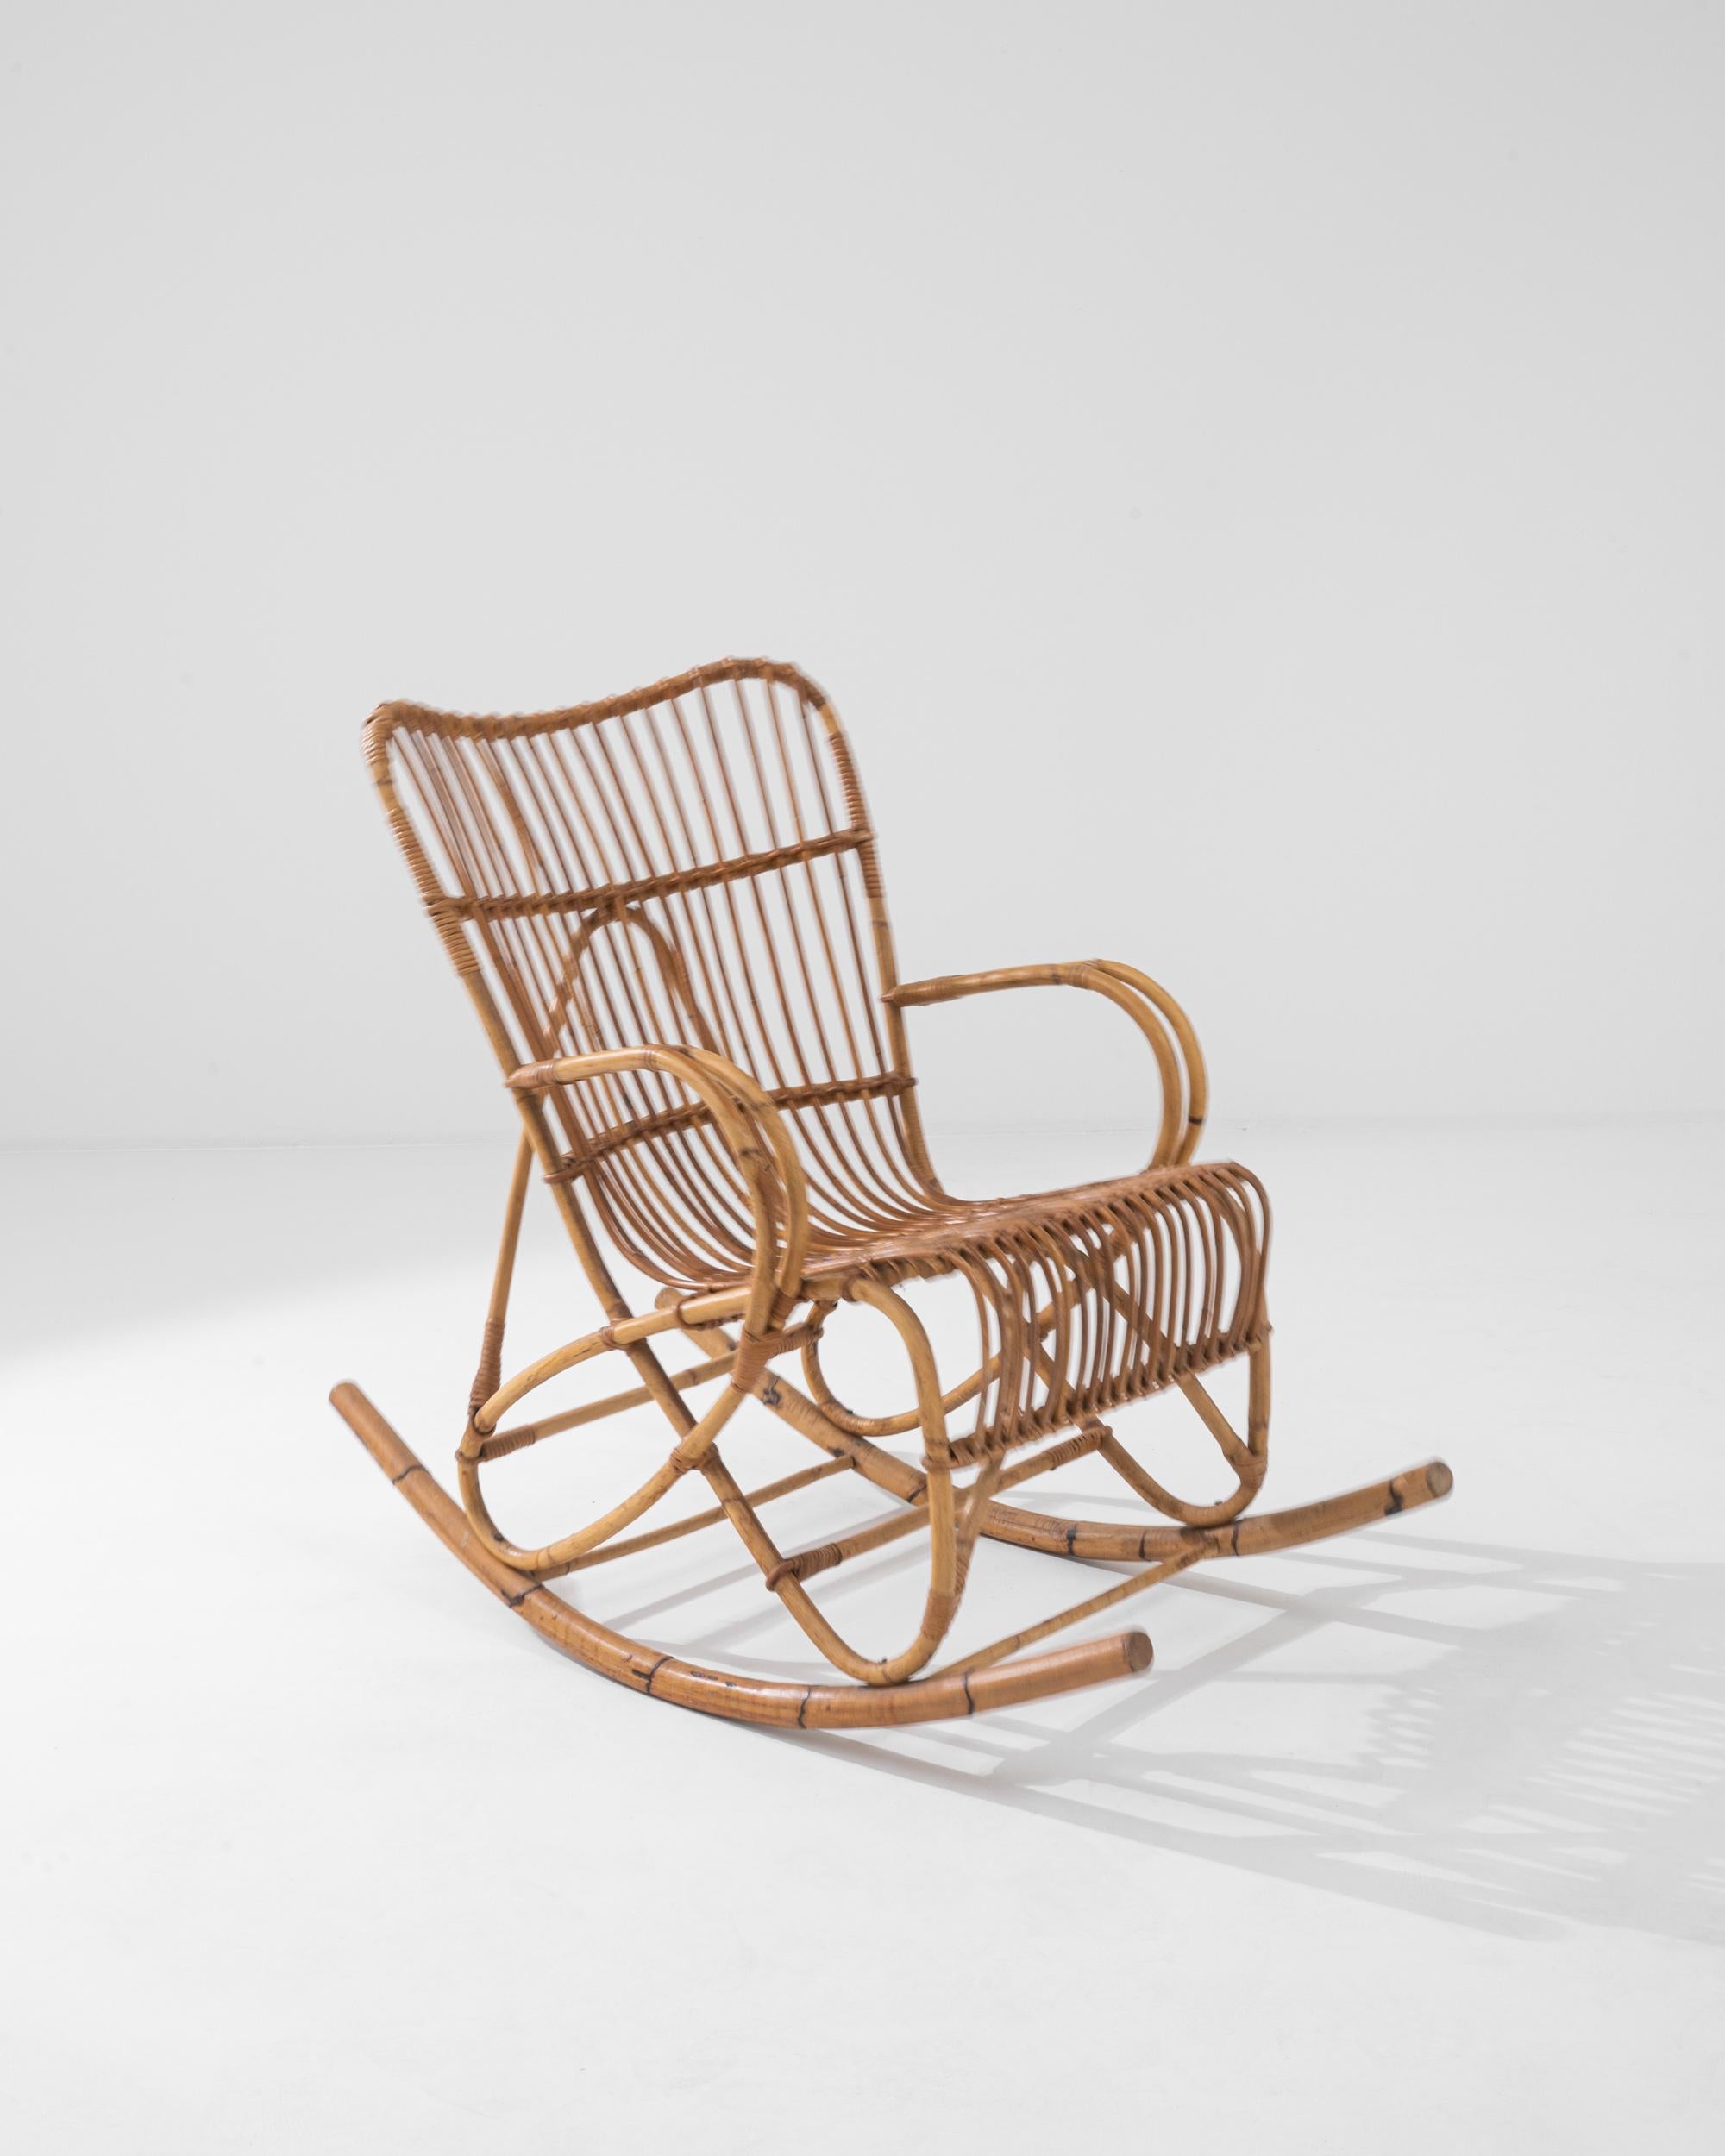 A wooden armchair from France, circa 1960. This French-made armchair is a playful twist on a classic rocker. Using lashed together rattan, artisans have crafted a chair both geometrically pleasing and surprisingly comfortable. Created by looping